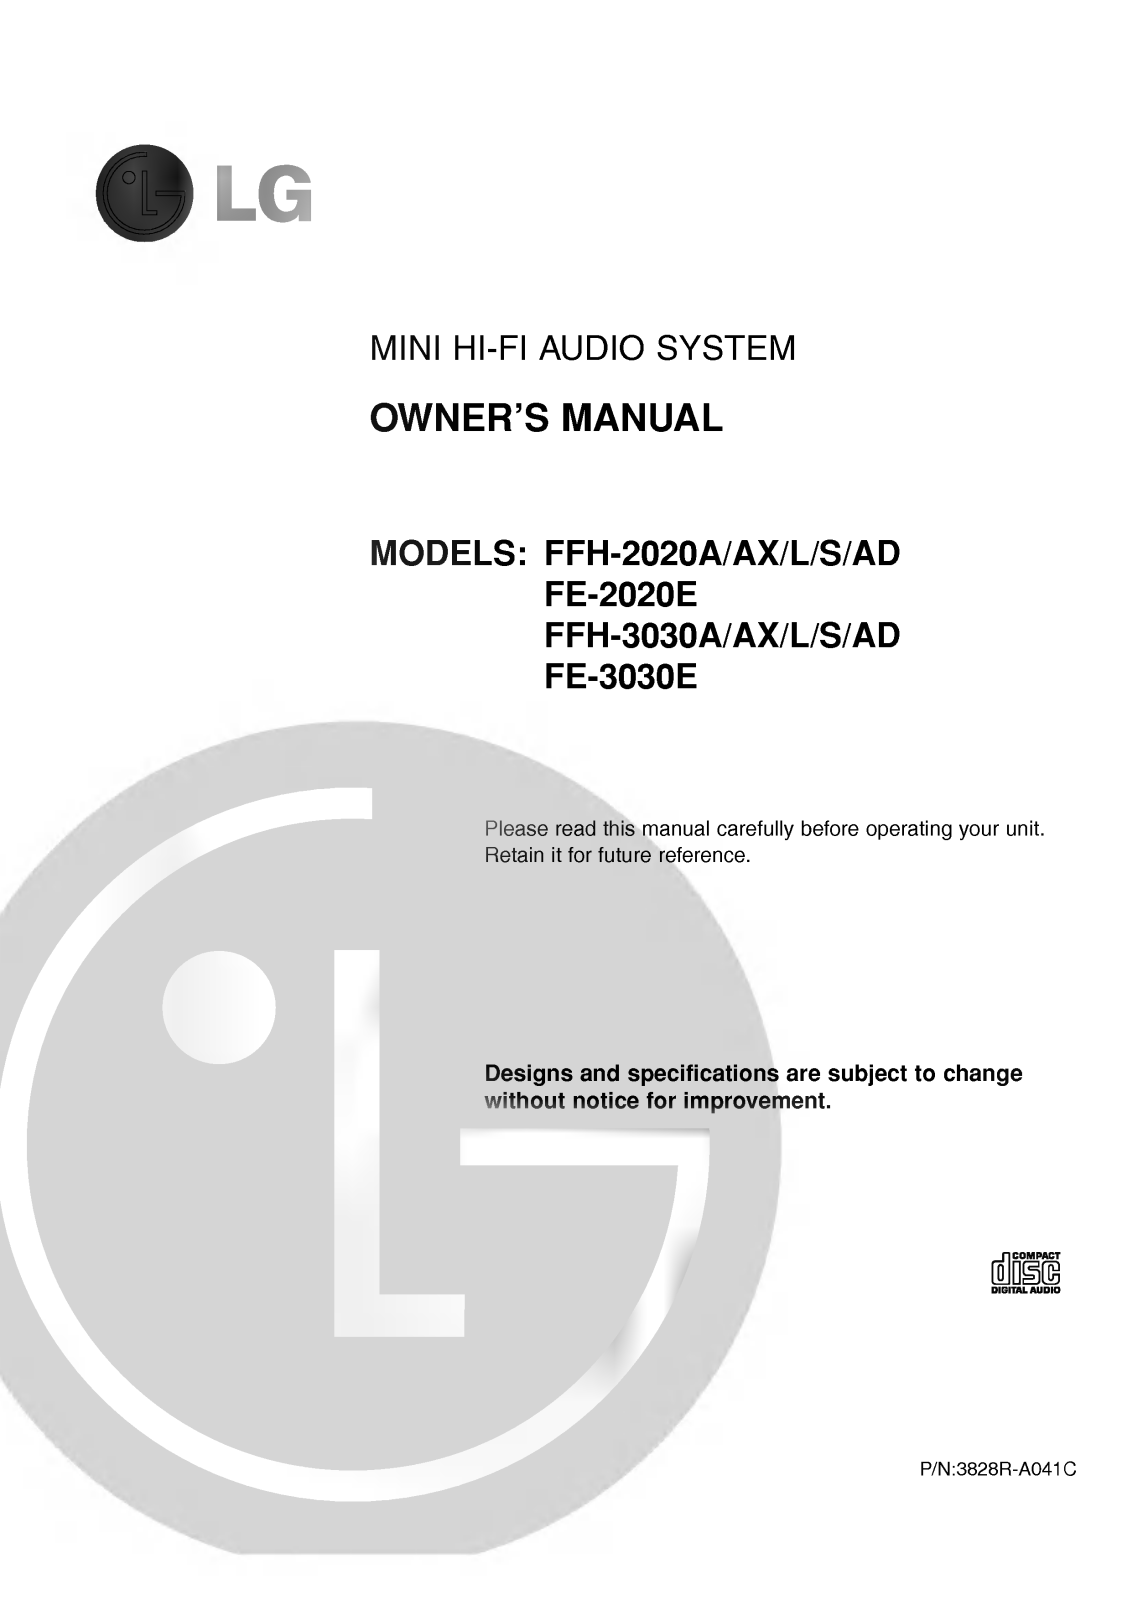 LG FFH-3030A Owner’s Manual